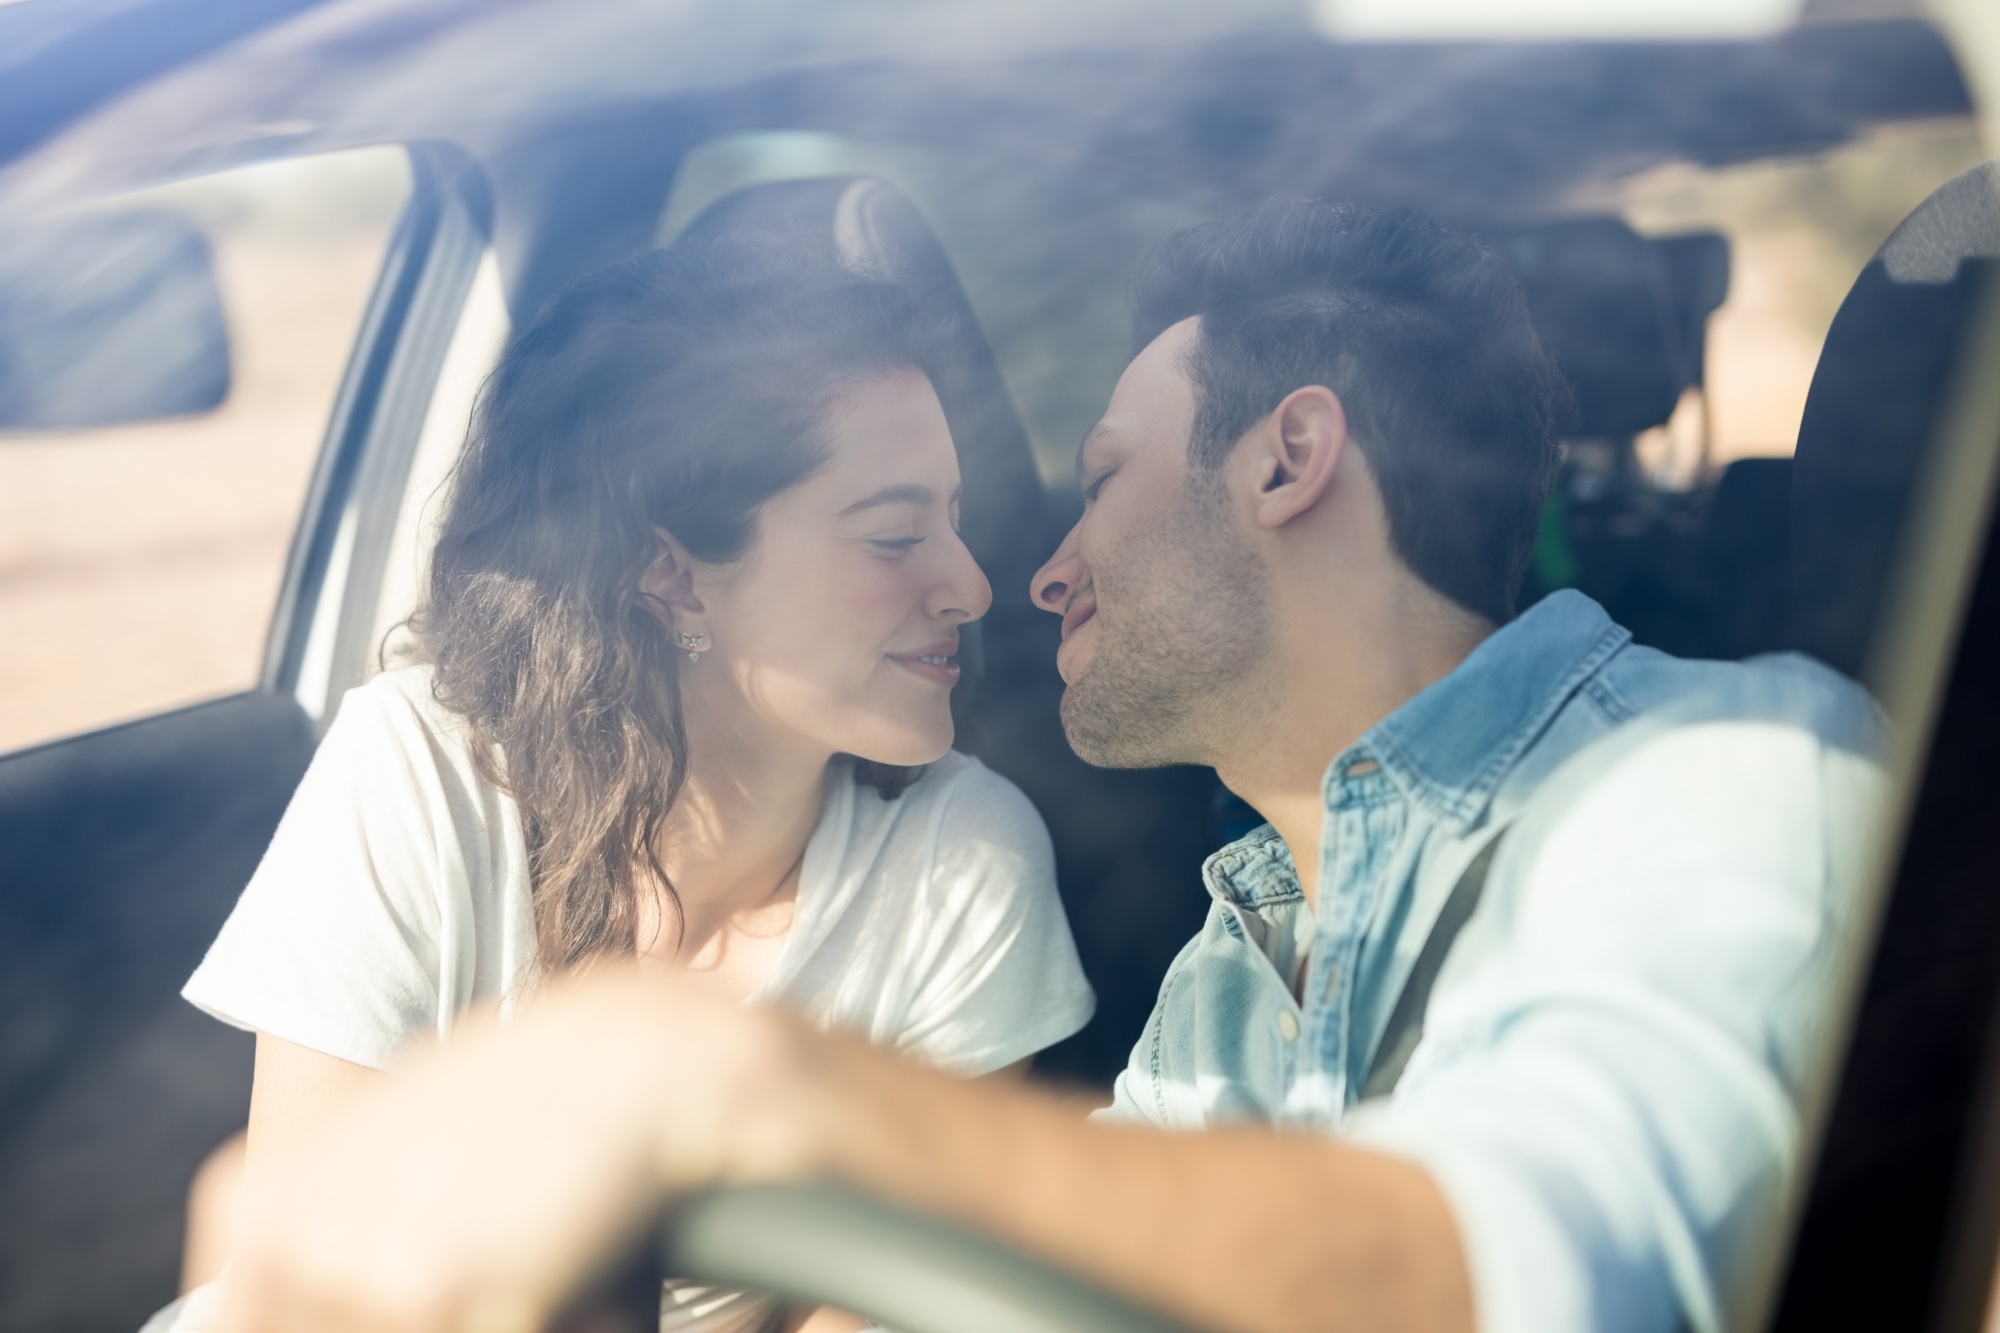 Let's Talk About Sex: When Being Too Busy Interferes With "Getting Busy" Woman and man leaning in to kiss each other in front seat of car